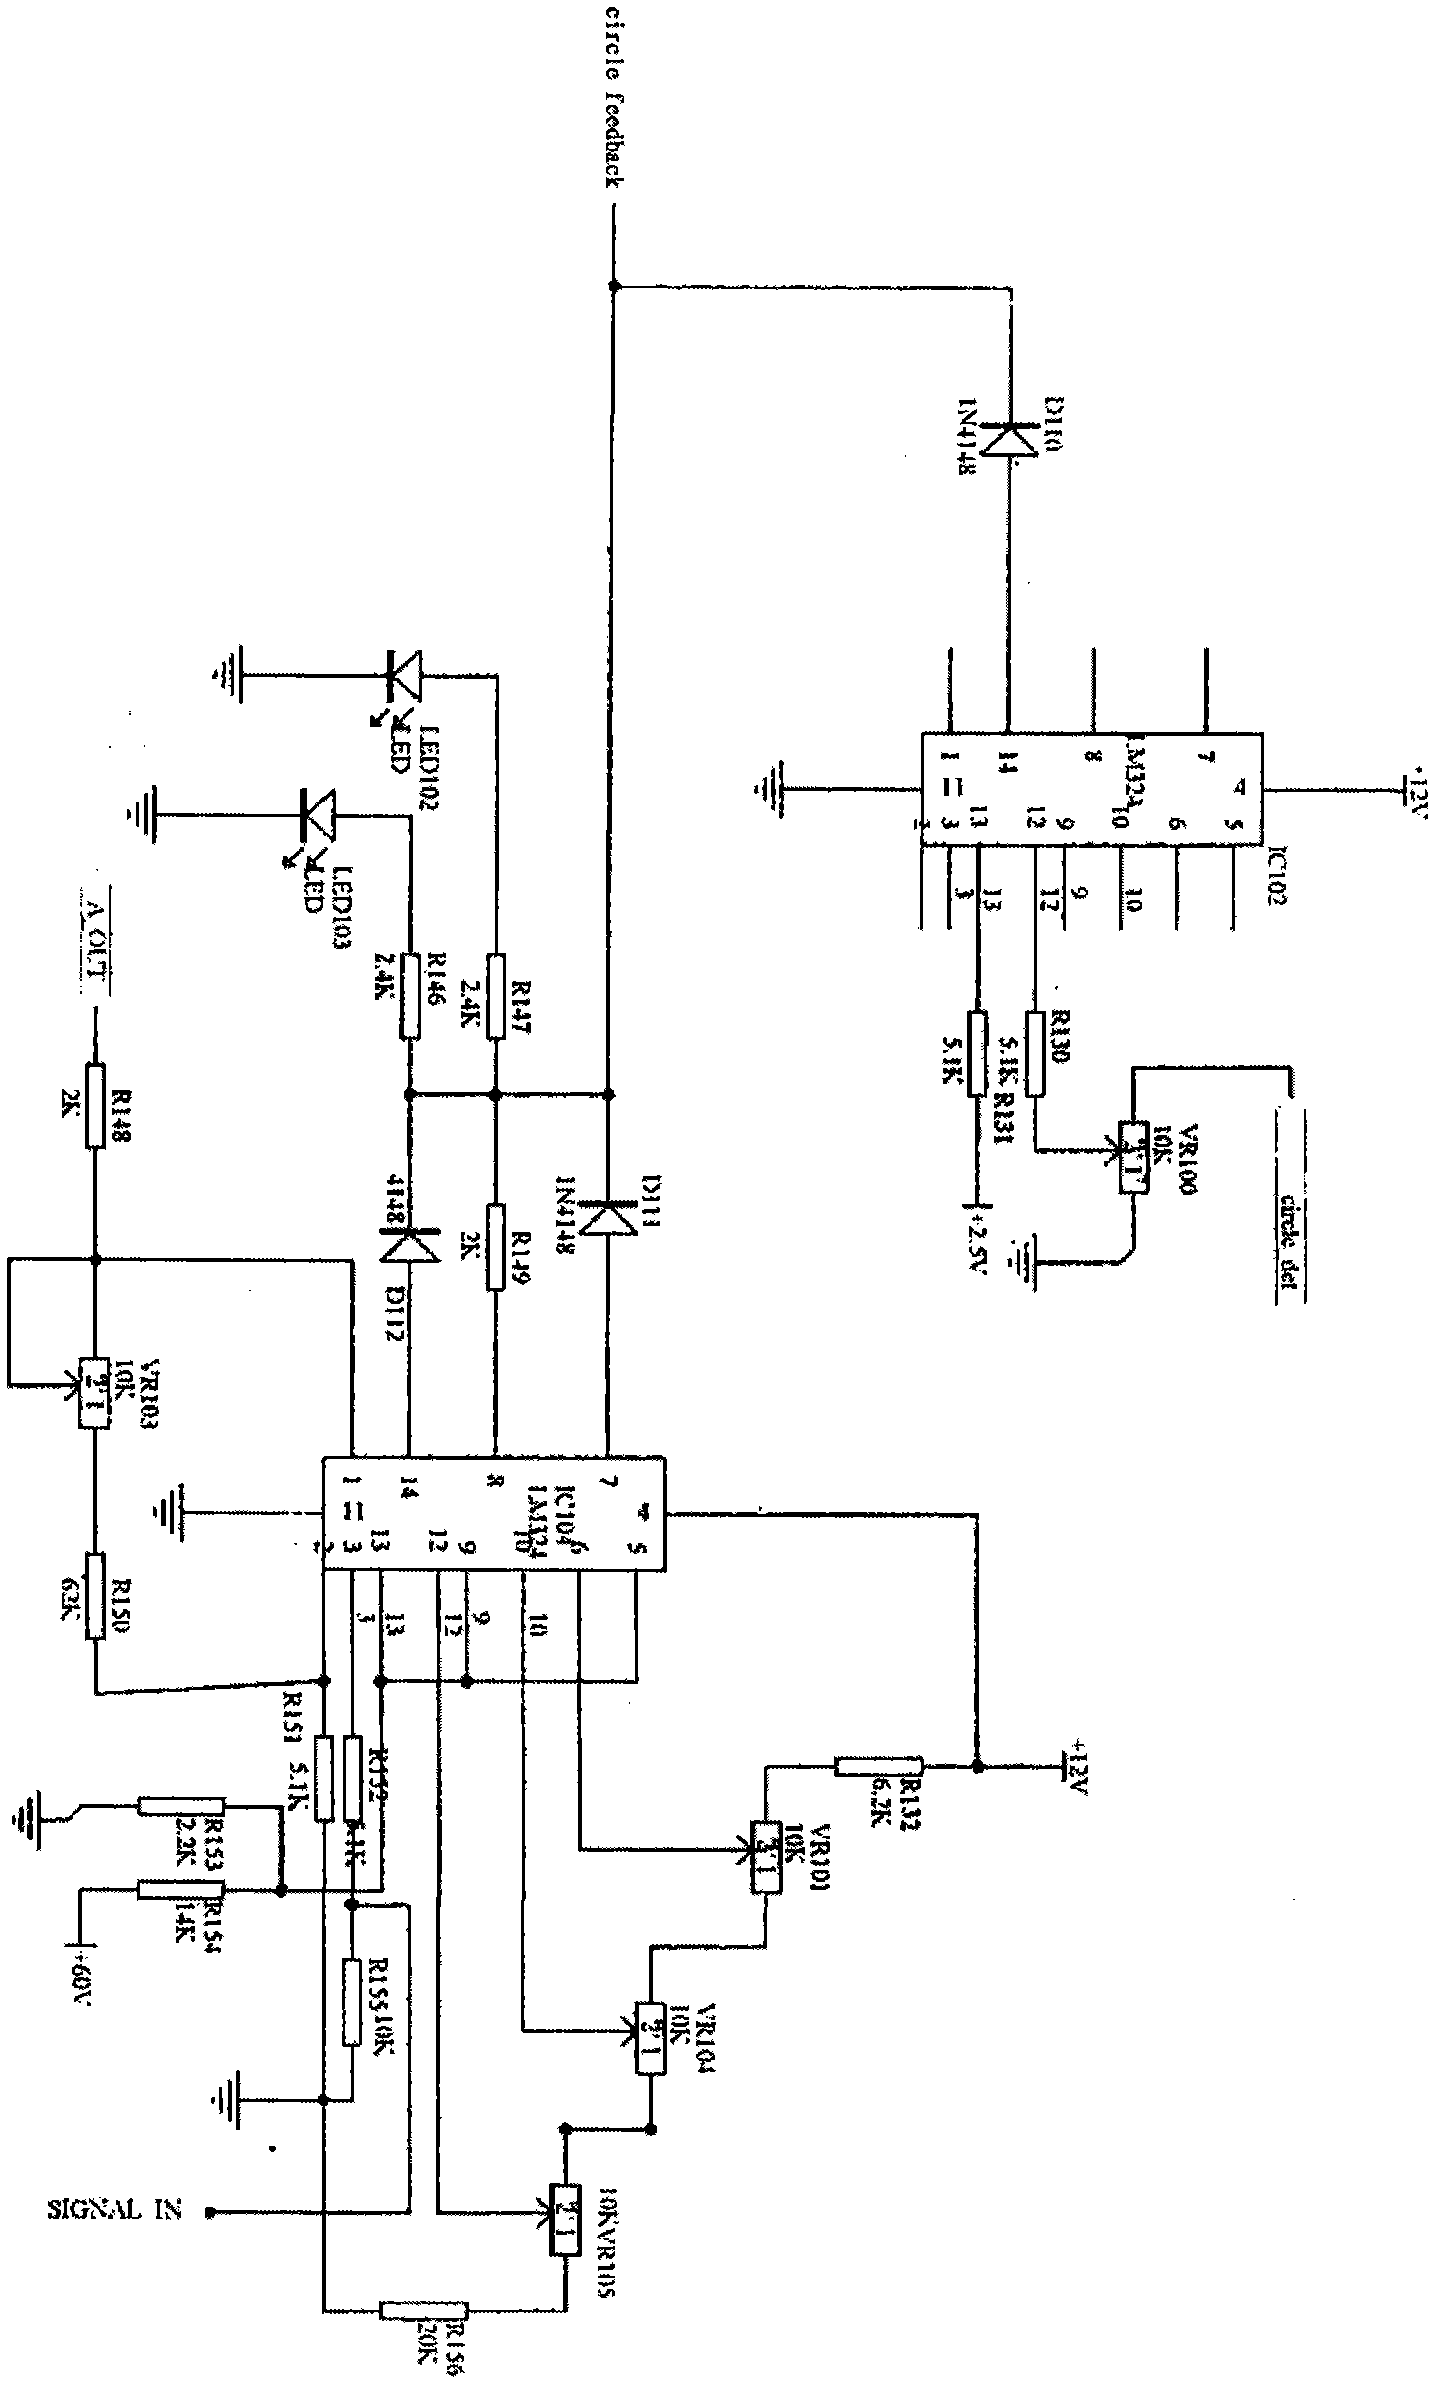 Controller for motor of pure electric vehicle